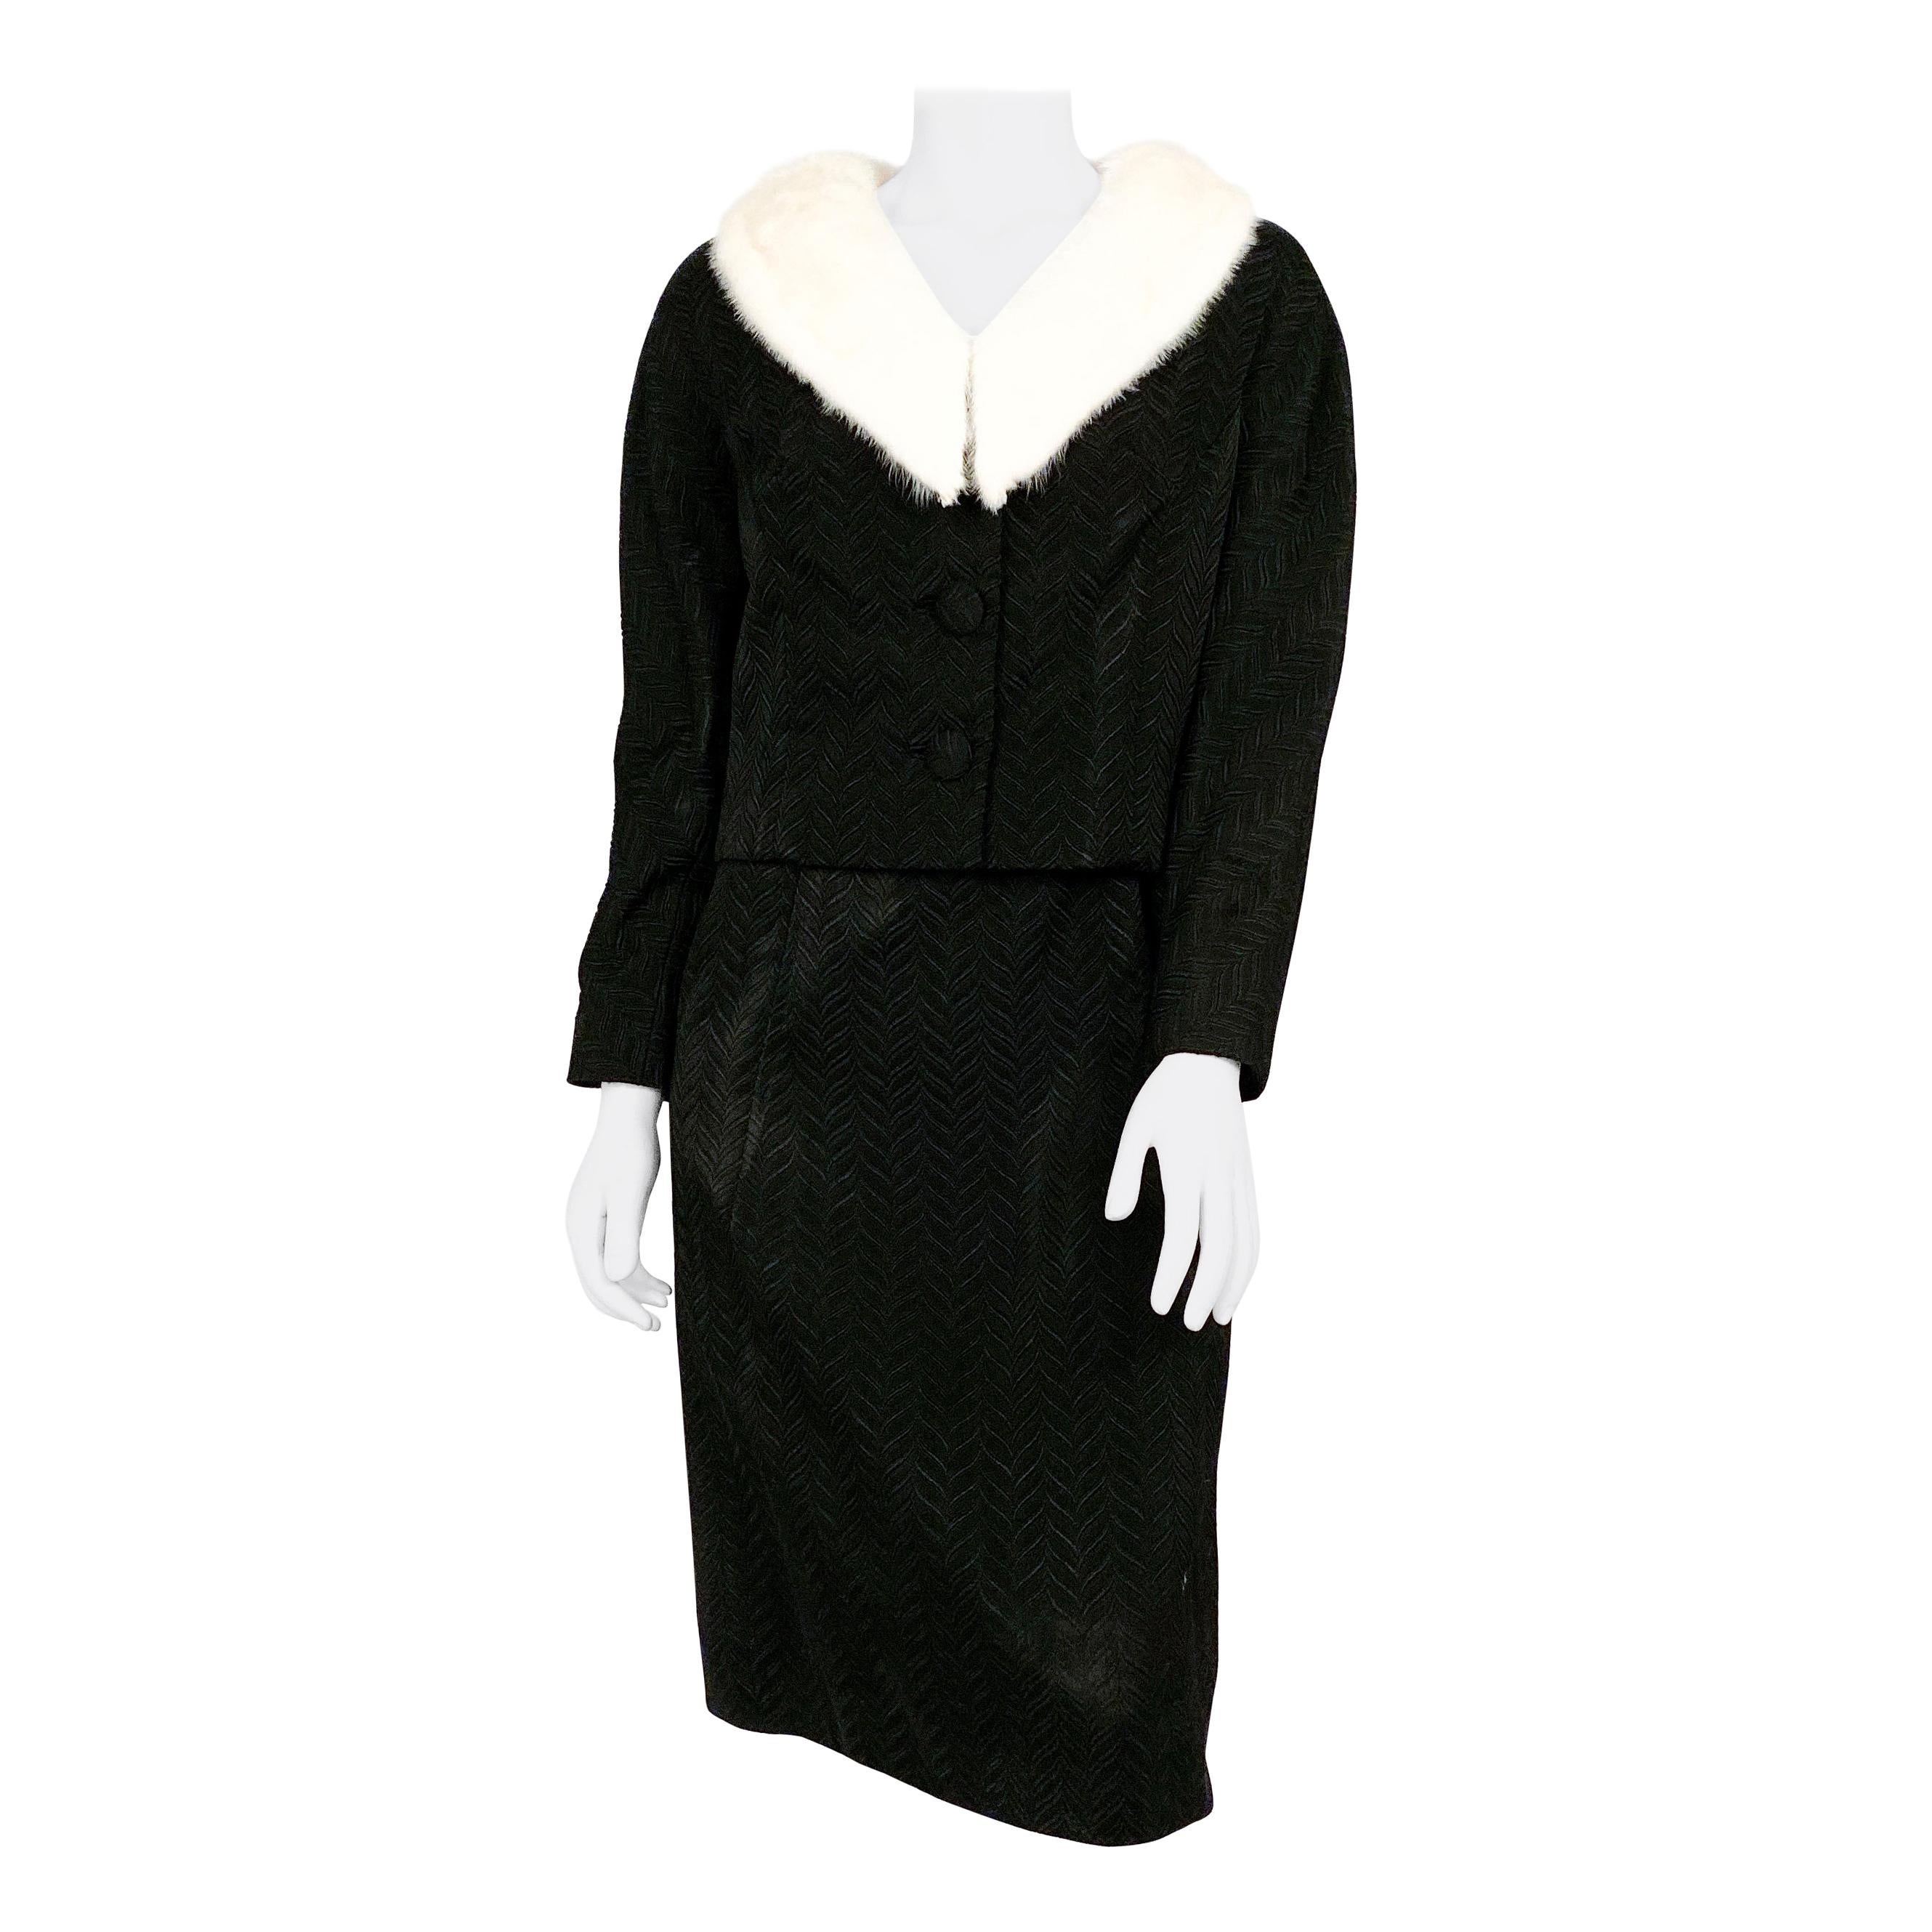 1950s Black Jacquard Dress with Matching Mink-collared Jacket For Sale